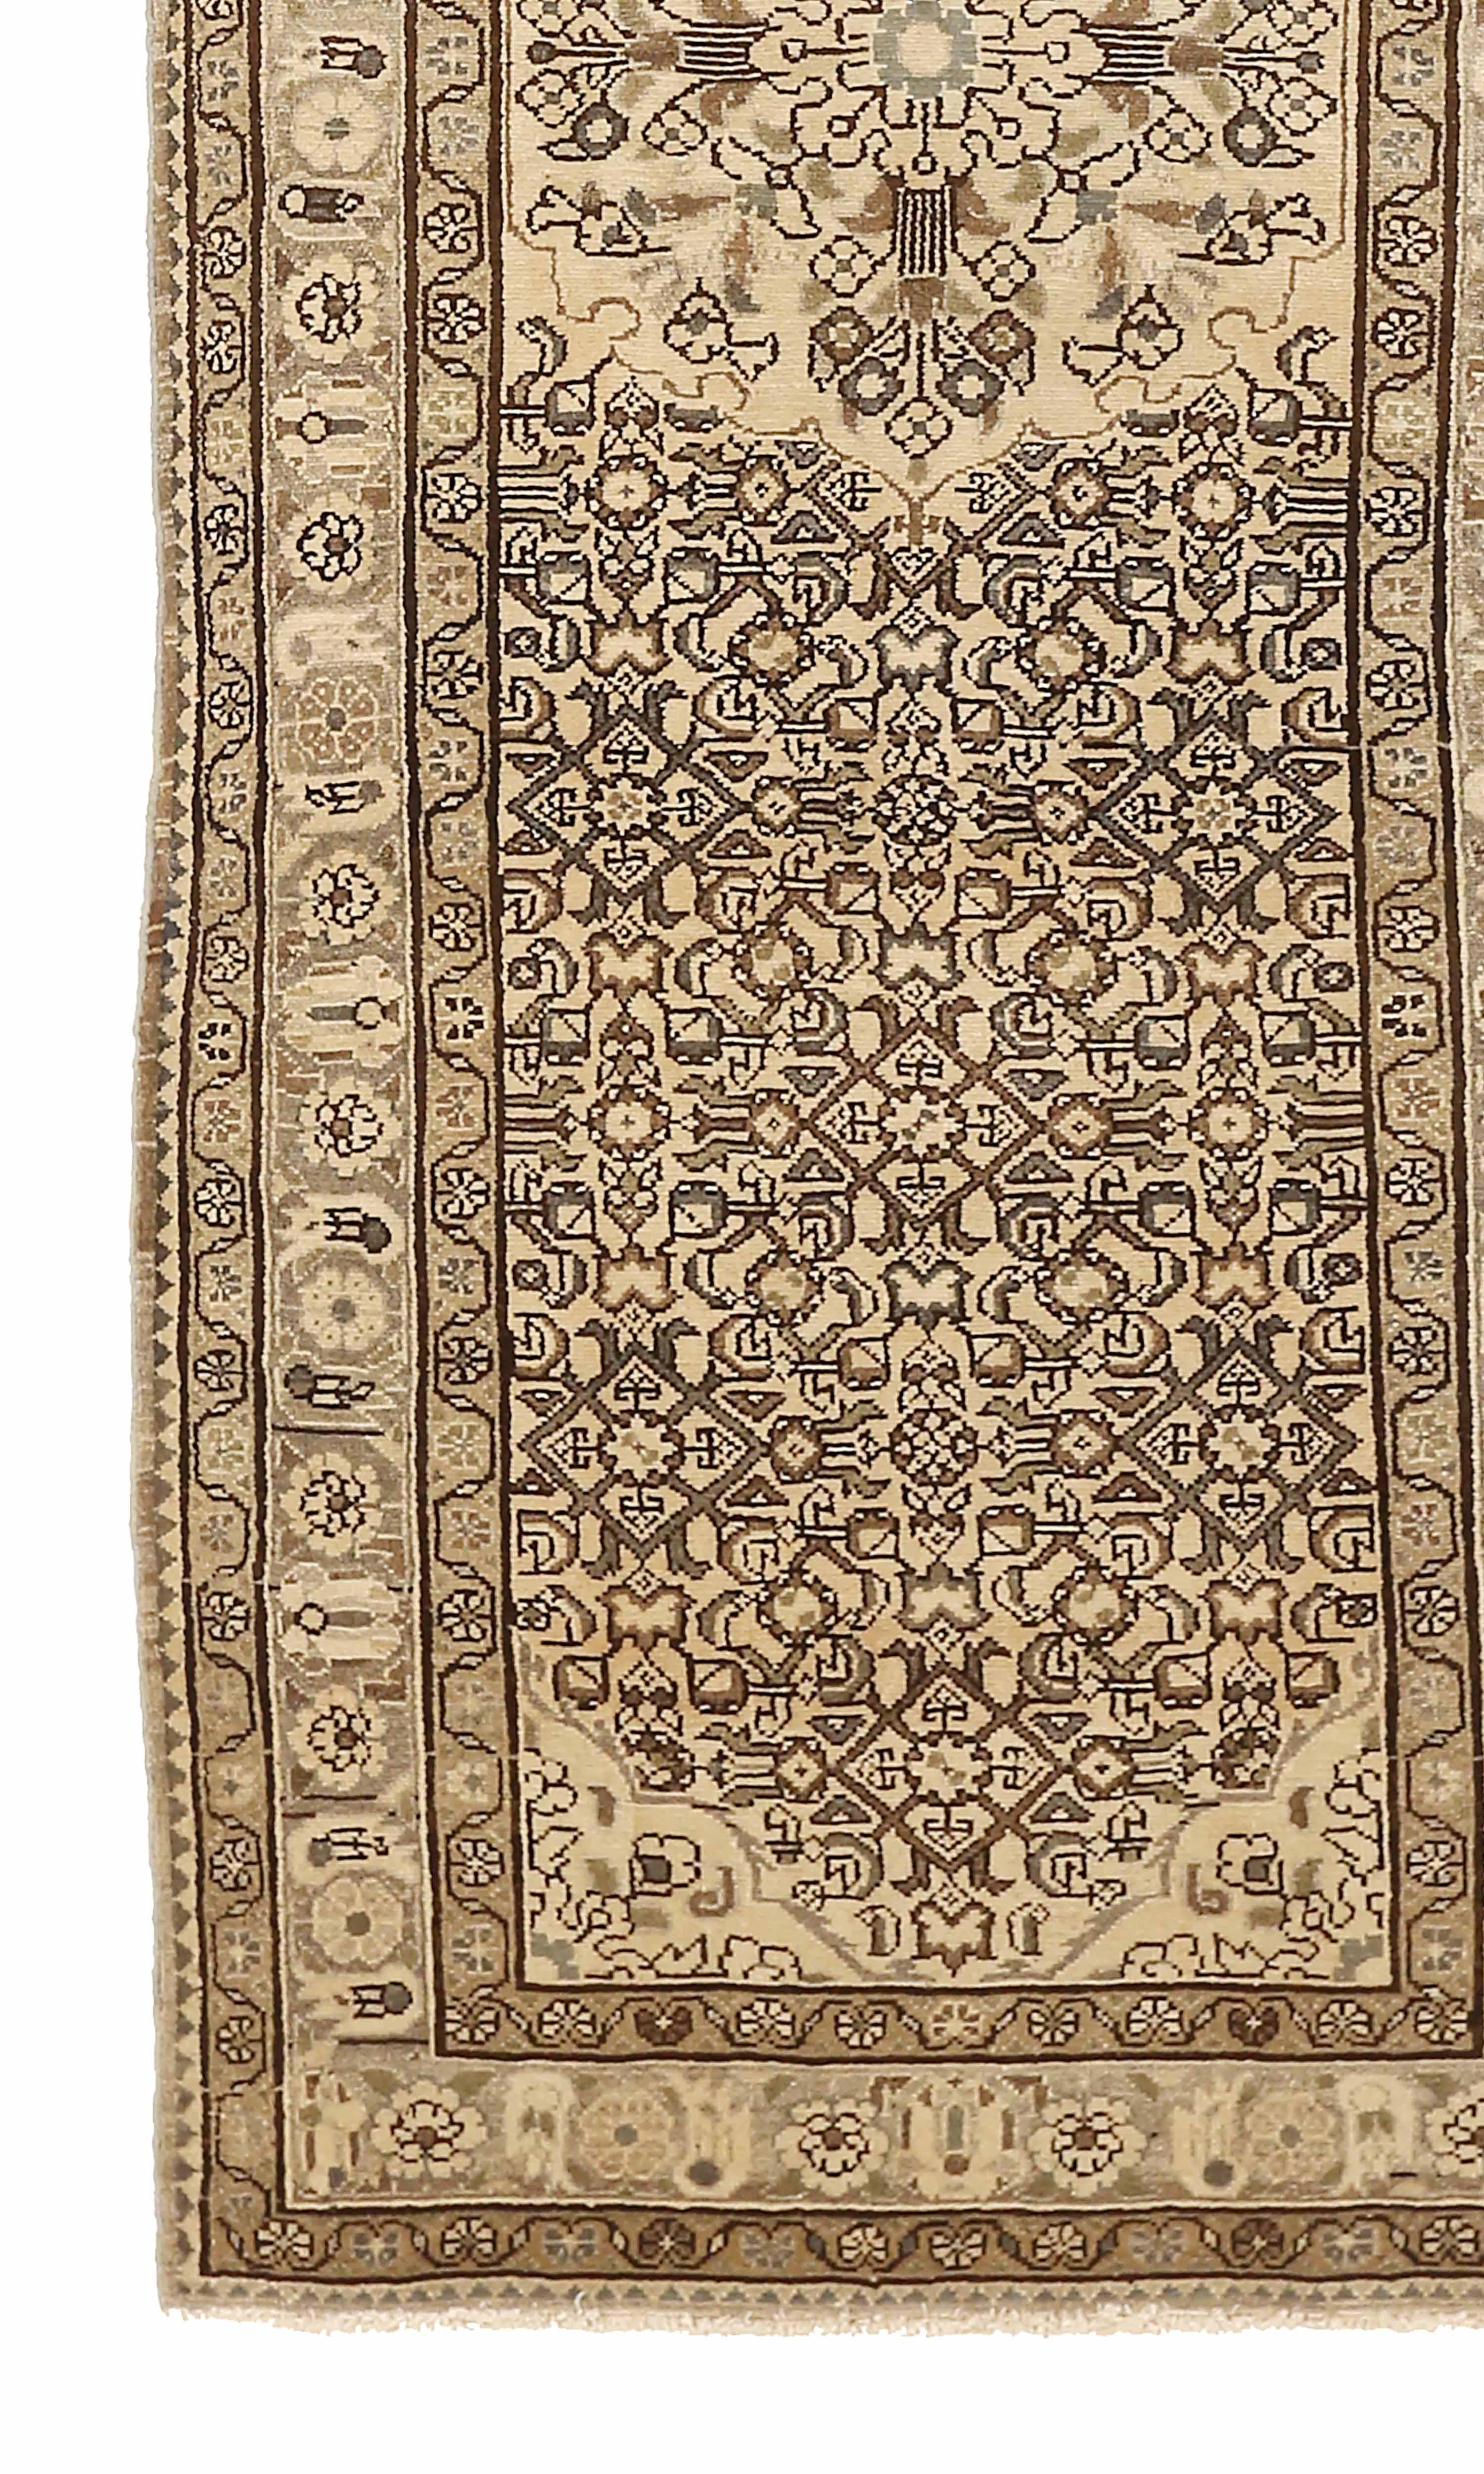 Hand-Woven Antique Persian Area Rug Malayer Design, Size: 3'8